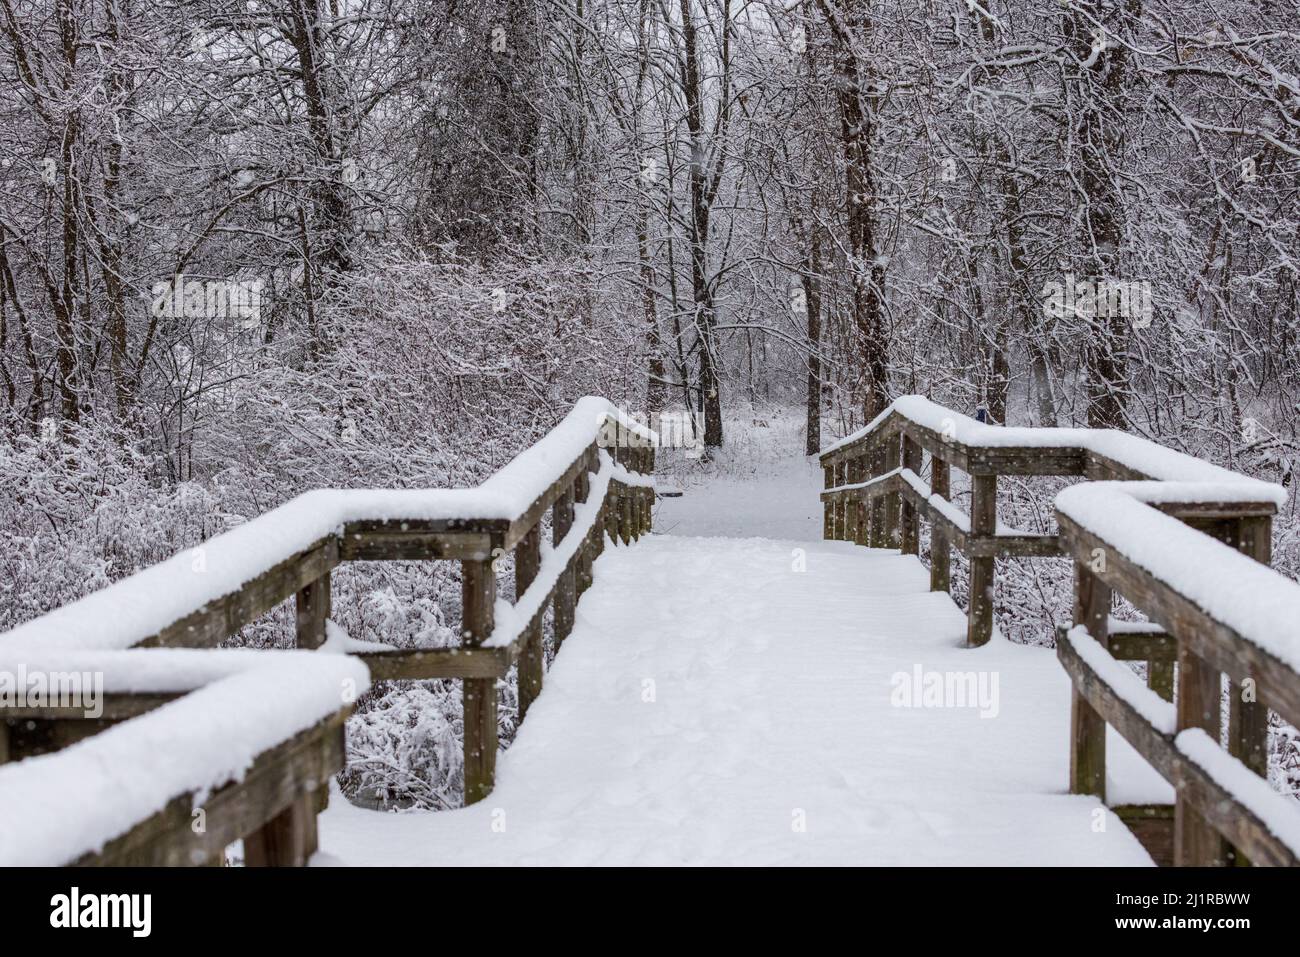 Snow covered wooden walkway leads to winter forest Stock Photo